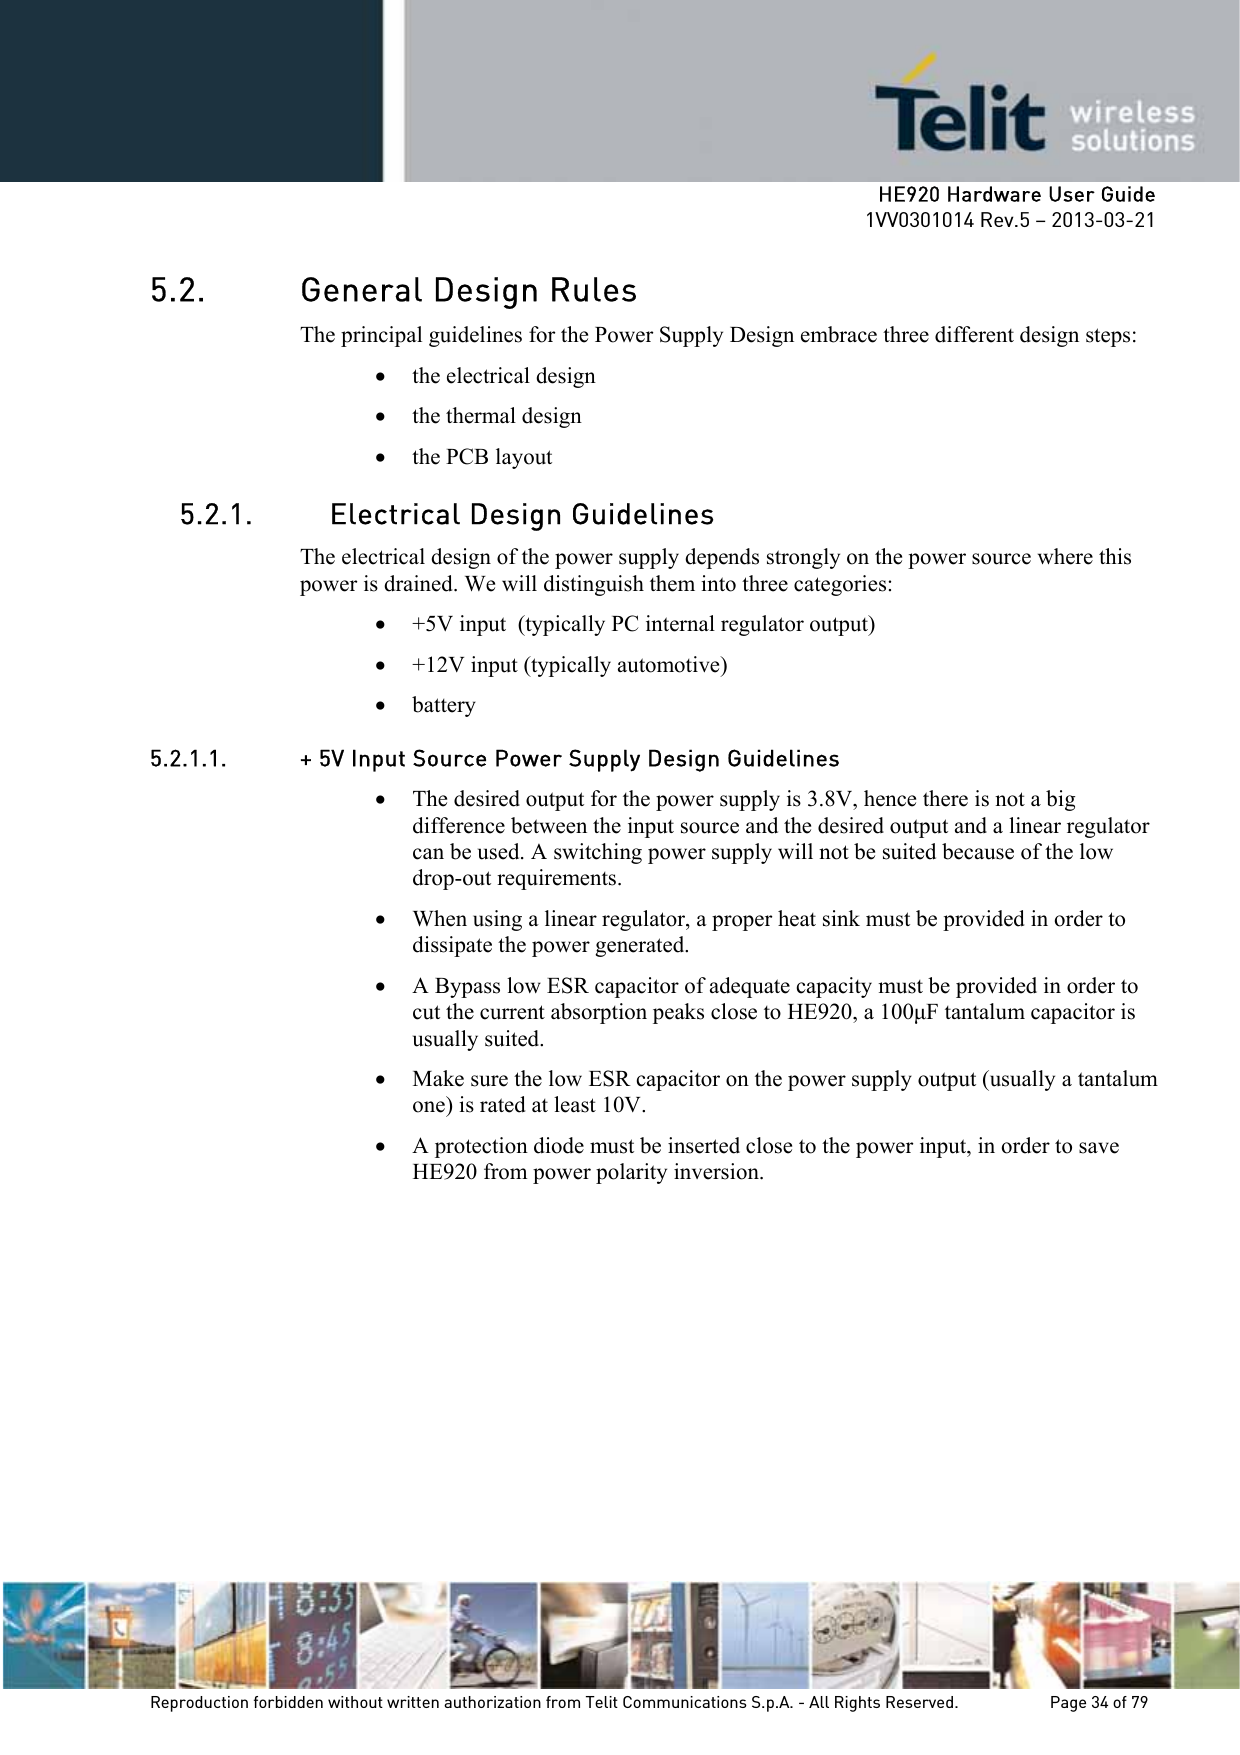     HE920 Hardware User Guide 1VV0301014 Rev.5 – 2013-03-21 Reproduction forbidden without written authorization from Telit Communications S.p.A. - All Rights Reserved.    Page 34 of 79  5.2. General Design Rules The principal guidelines for the Power Supply Design embrace three different design steps: • the electrical design • the thermal design • the PCB layout 5.2.1. Electrical Design Guidelines The electrical design of the power supply depends strongly on the power source where this power is drained. We will distinguish them into three categories: • +5V input  (typically PC internal regulator output) • +12V input (typically automotive) • battery 5.2.1.1. + 5V Input Source Power Supply Design Guidelines • The desired output for the power supply is 3.8V, hence there is not a big difference between the input source and the desired output and a linear regulator can be used. A switching power supply will not be suited because of the low drop-out requirements. • When using a linear regulator, a proper heat sink must be provided in order to dissipate the power generated. • A Bypass low ESR capacitor of adequate capacity must be provided in order to cut the current absorption peaks close to HE920, a 100µF tantalum capacitor is usually suited. • Make sure the low ESR capacitor on the power supply output (usually a tantalum one) is rated at least 10V. • A protection diode must be inserted close to the power input, in order to save HE920 from power polarity inversion.       